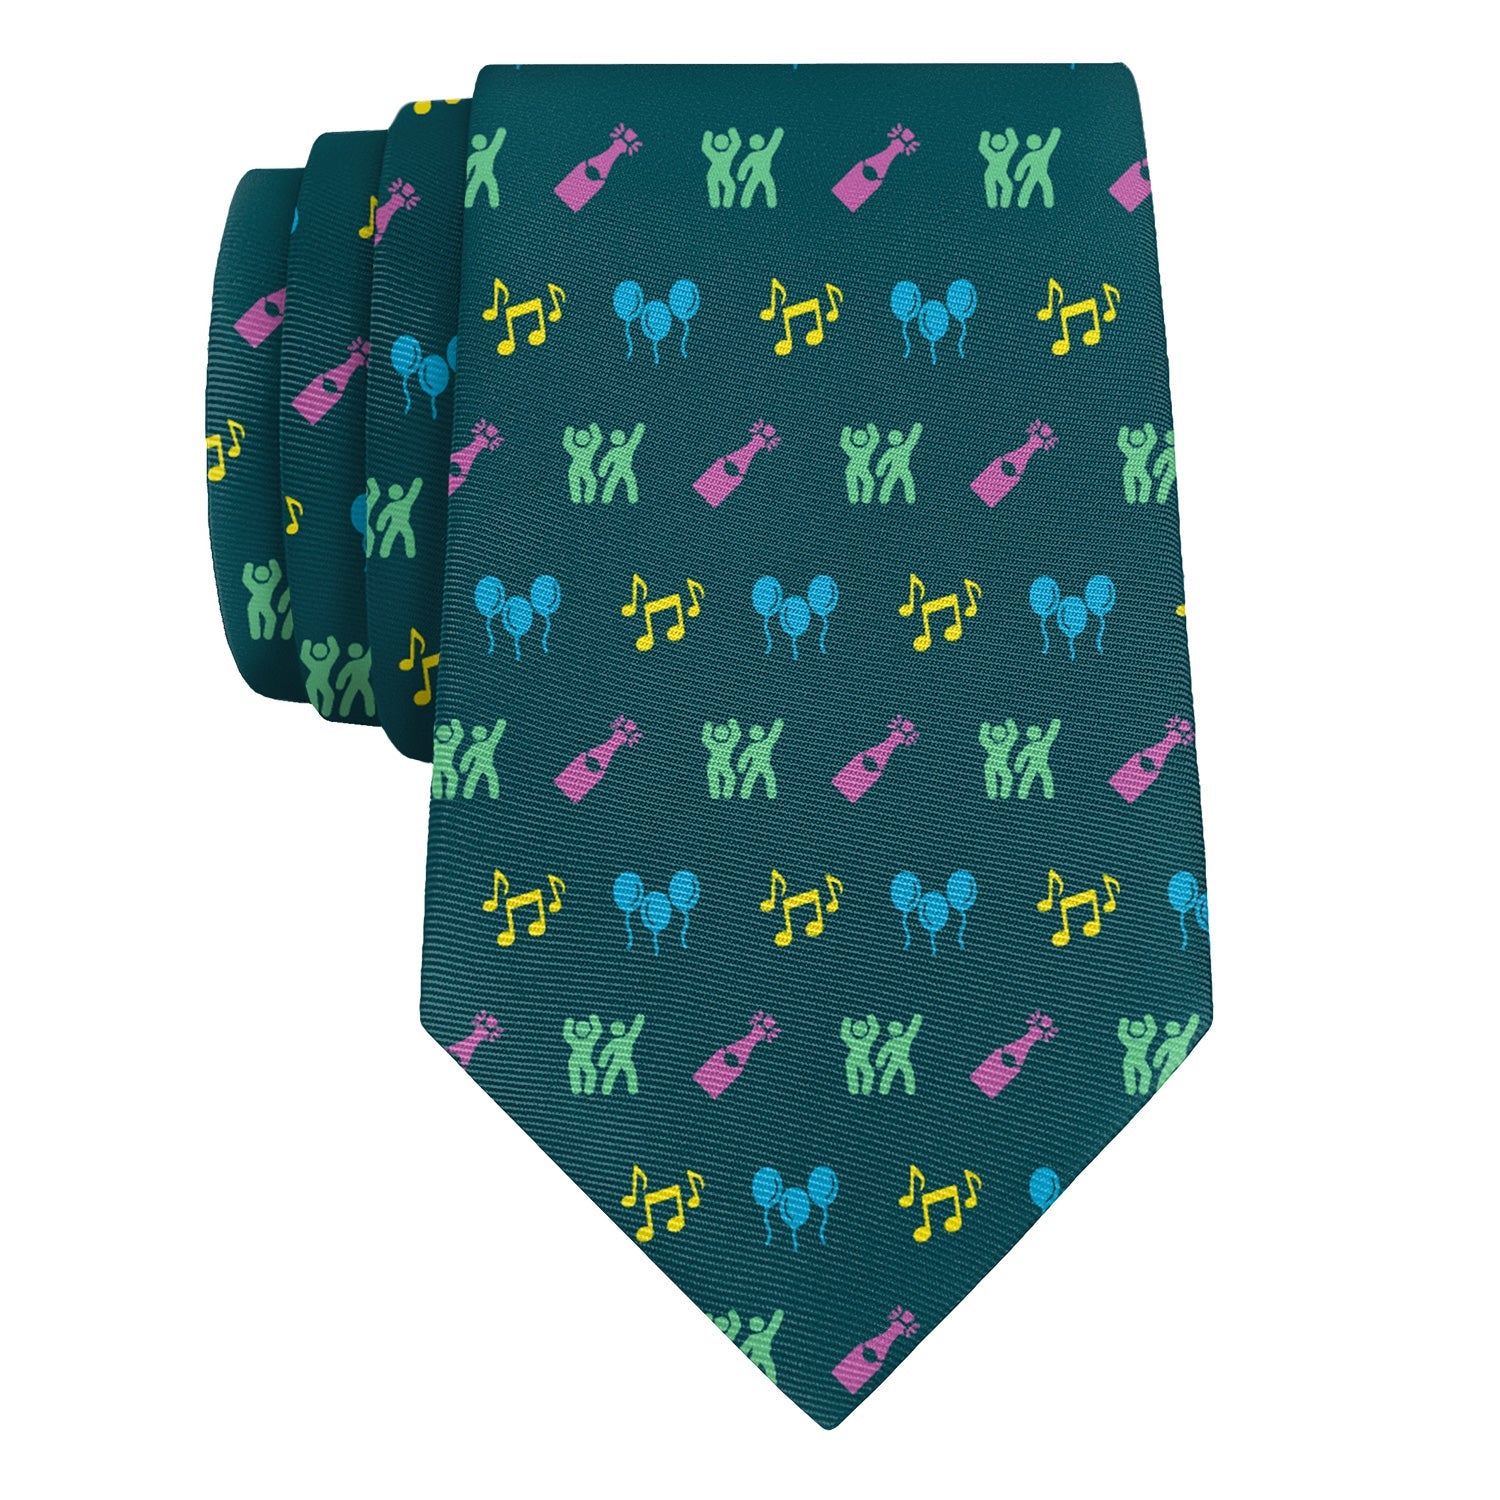 Partying With Friends Necktie - Knotty 2.75" -  - Knotty Tie Co.